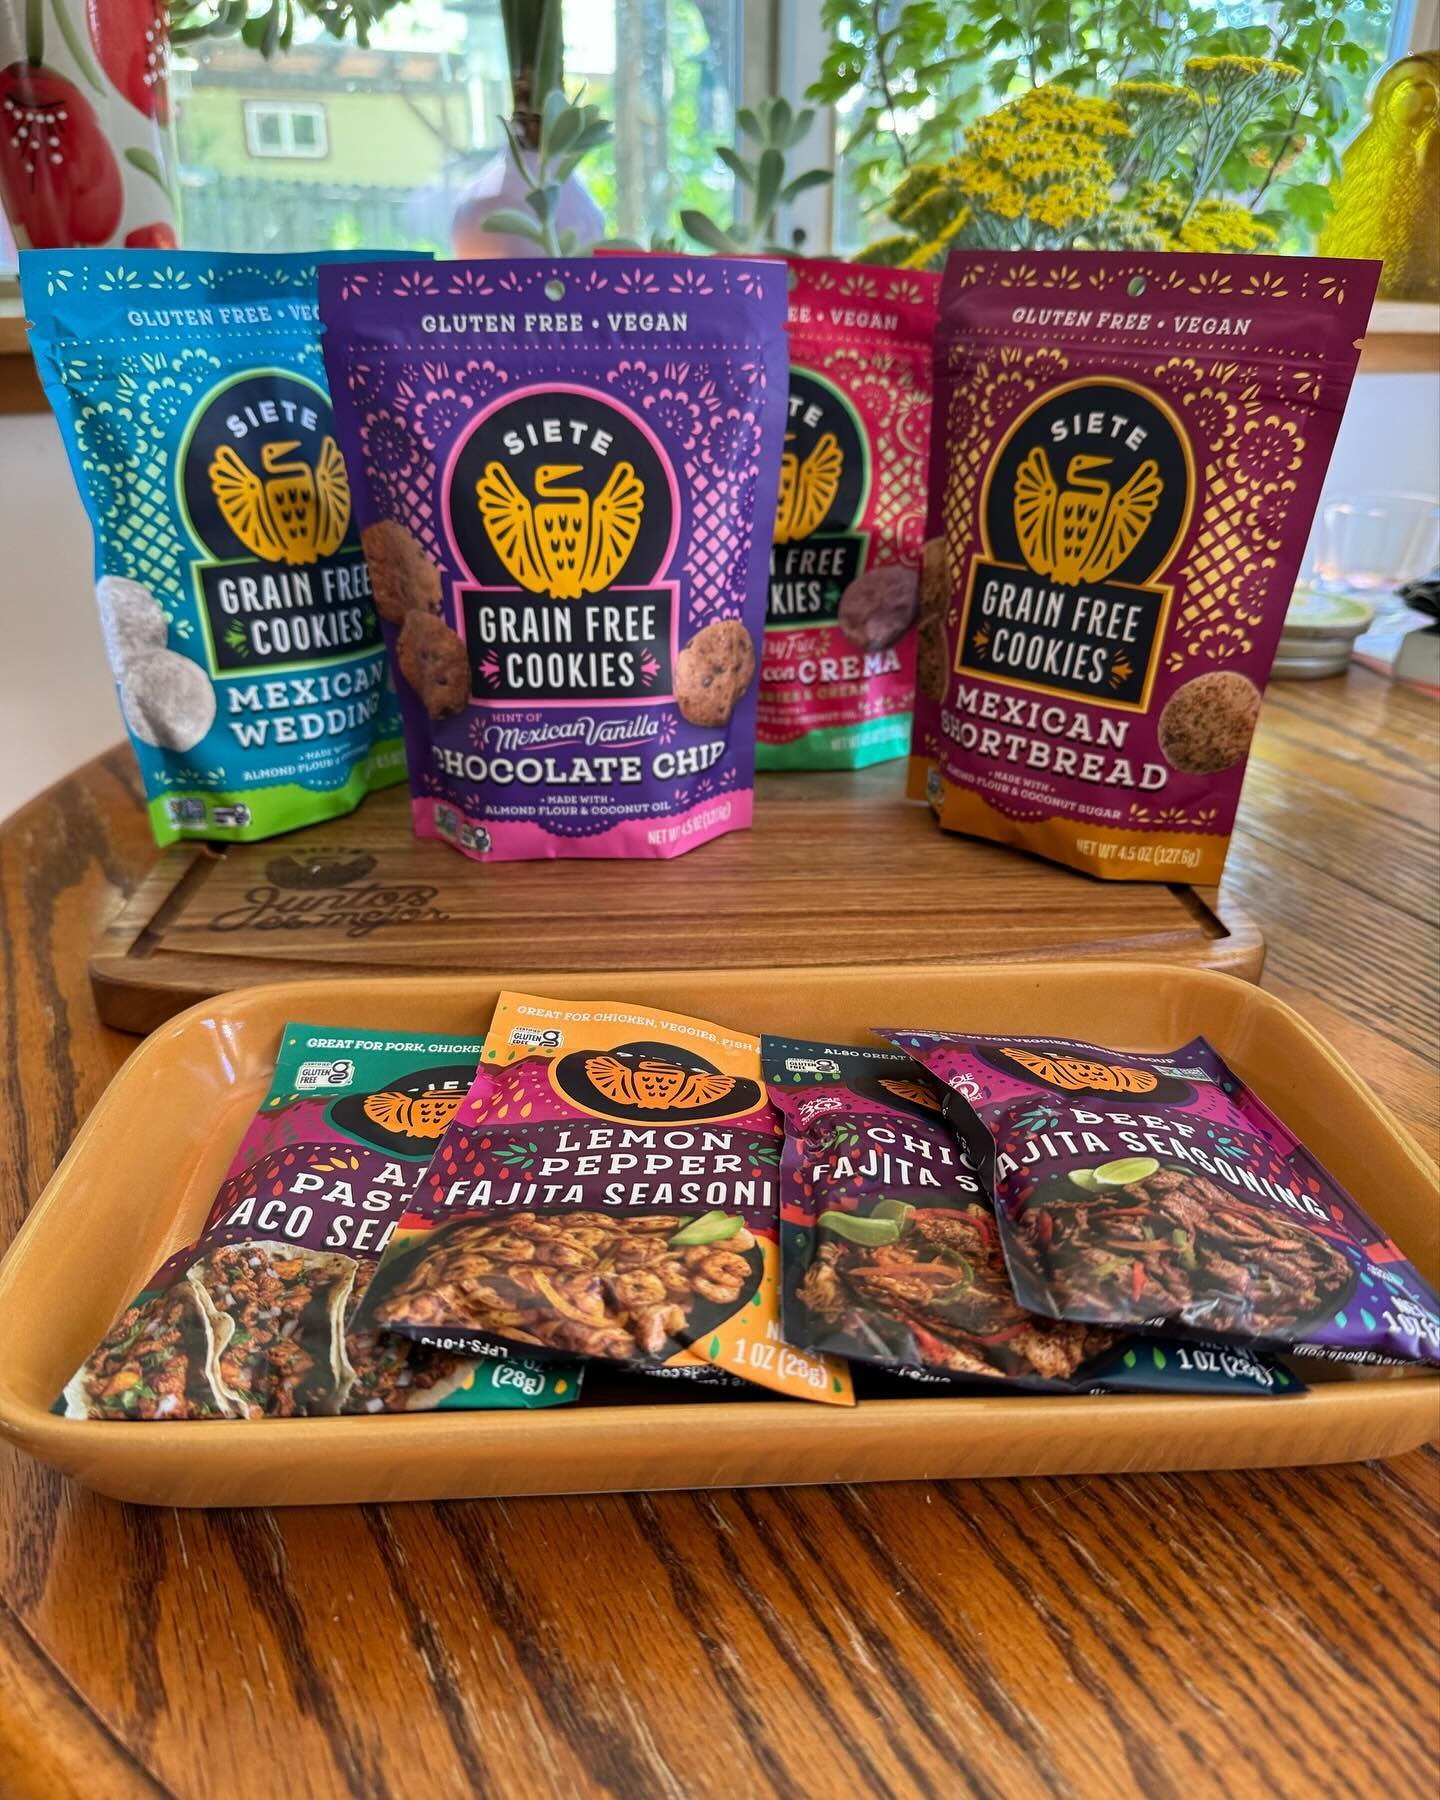 I love being a @sietefoods ambassador because like a lot of my clients, I can&rsquo;t eat gluten and still want to eat yummy choices! 

Siete offers delicious options even if you&rsquo;re not following a specific eating pattern. I can&rsquo;t wait to